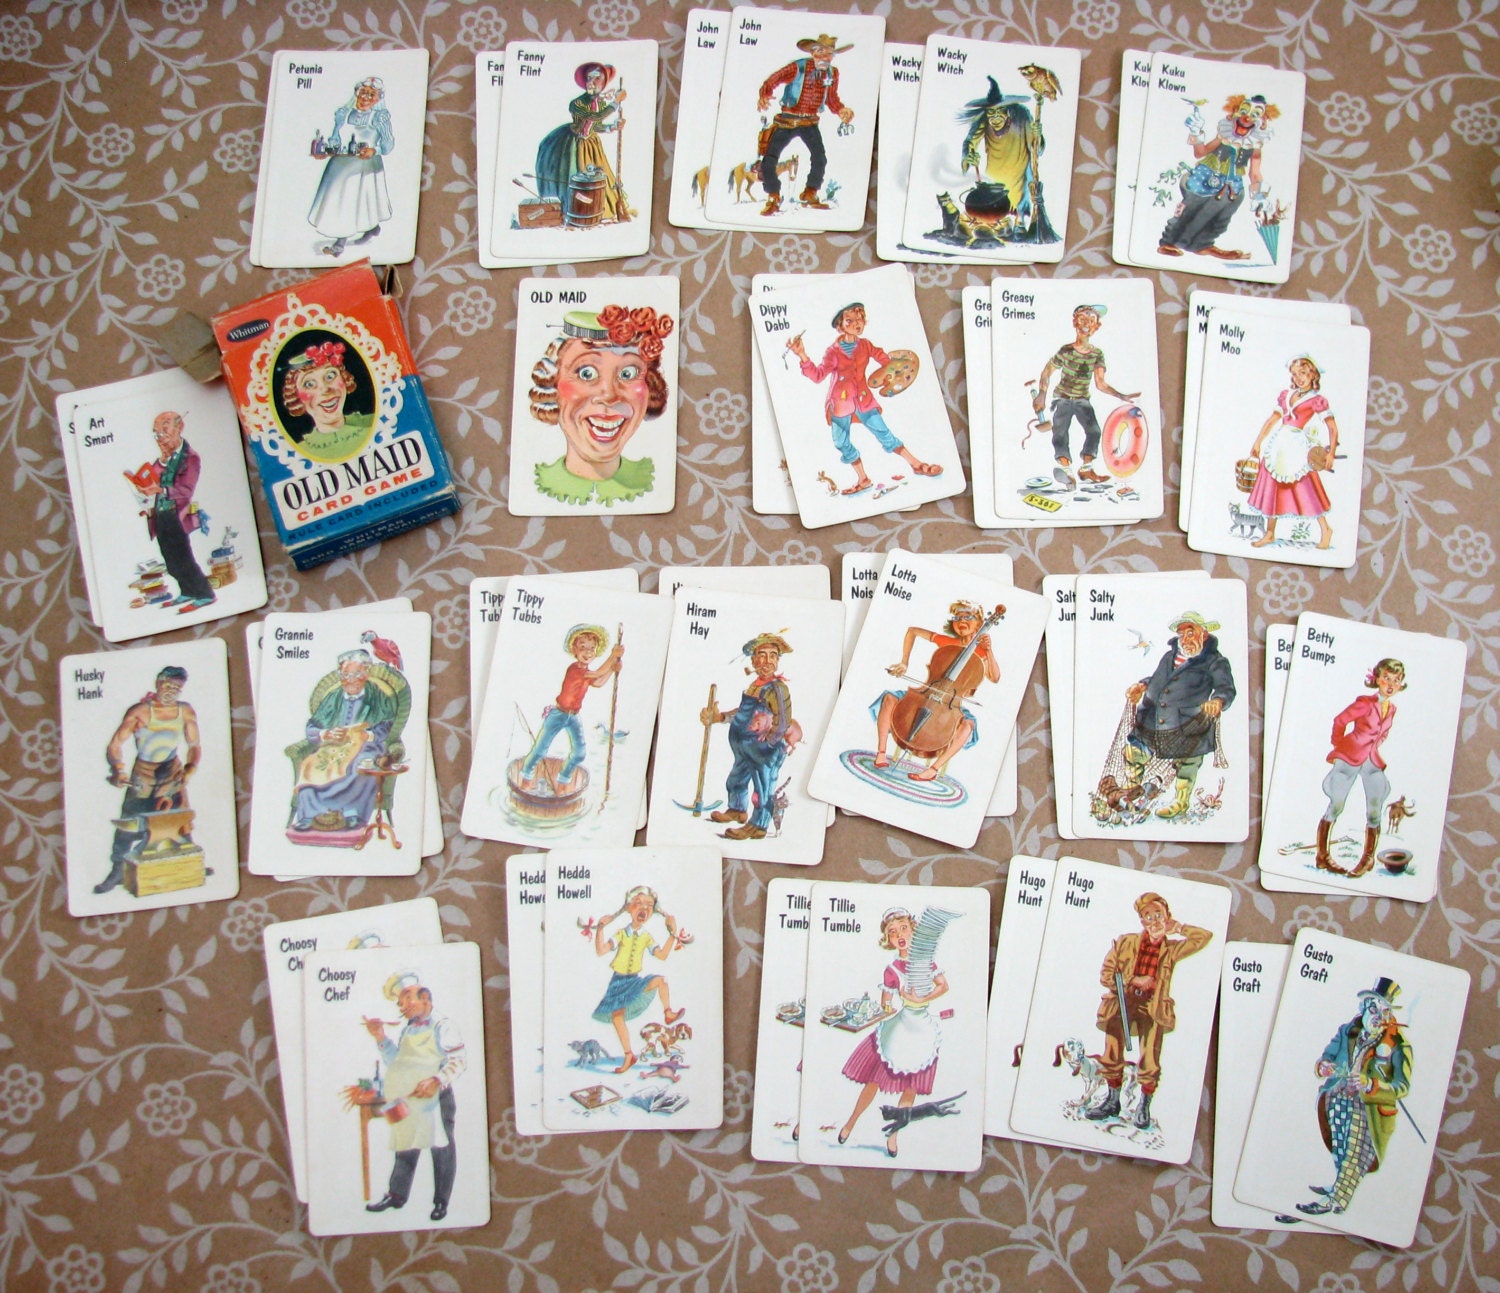 old maid rules cards